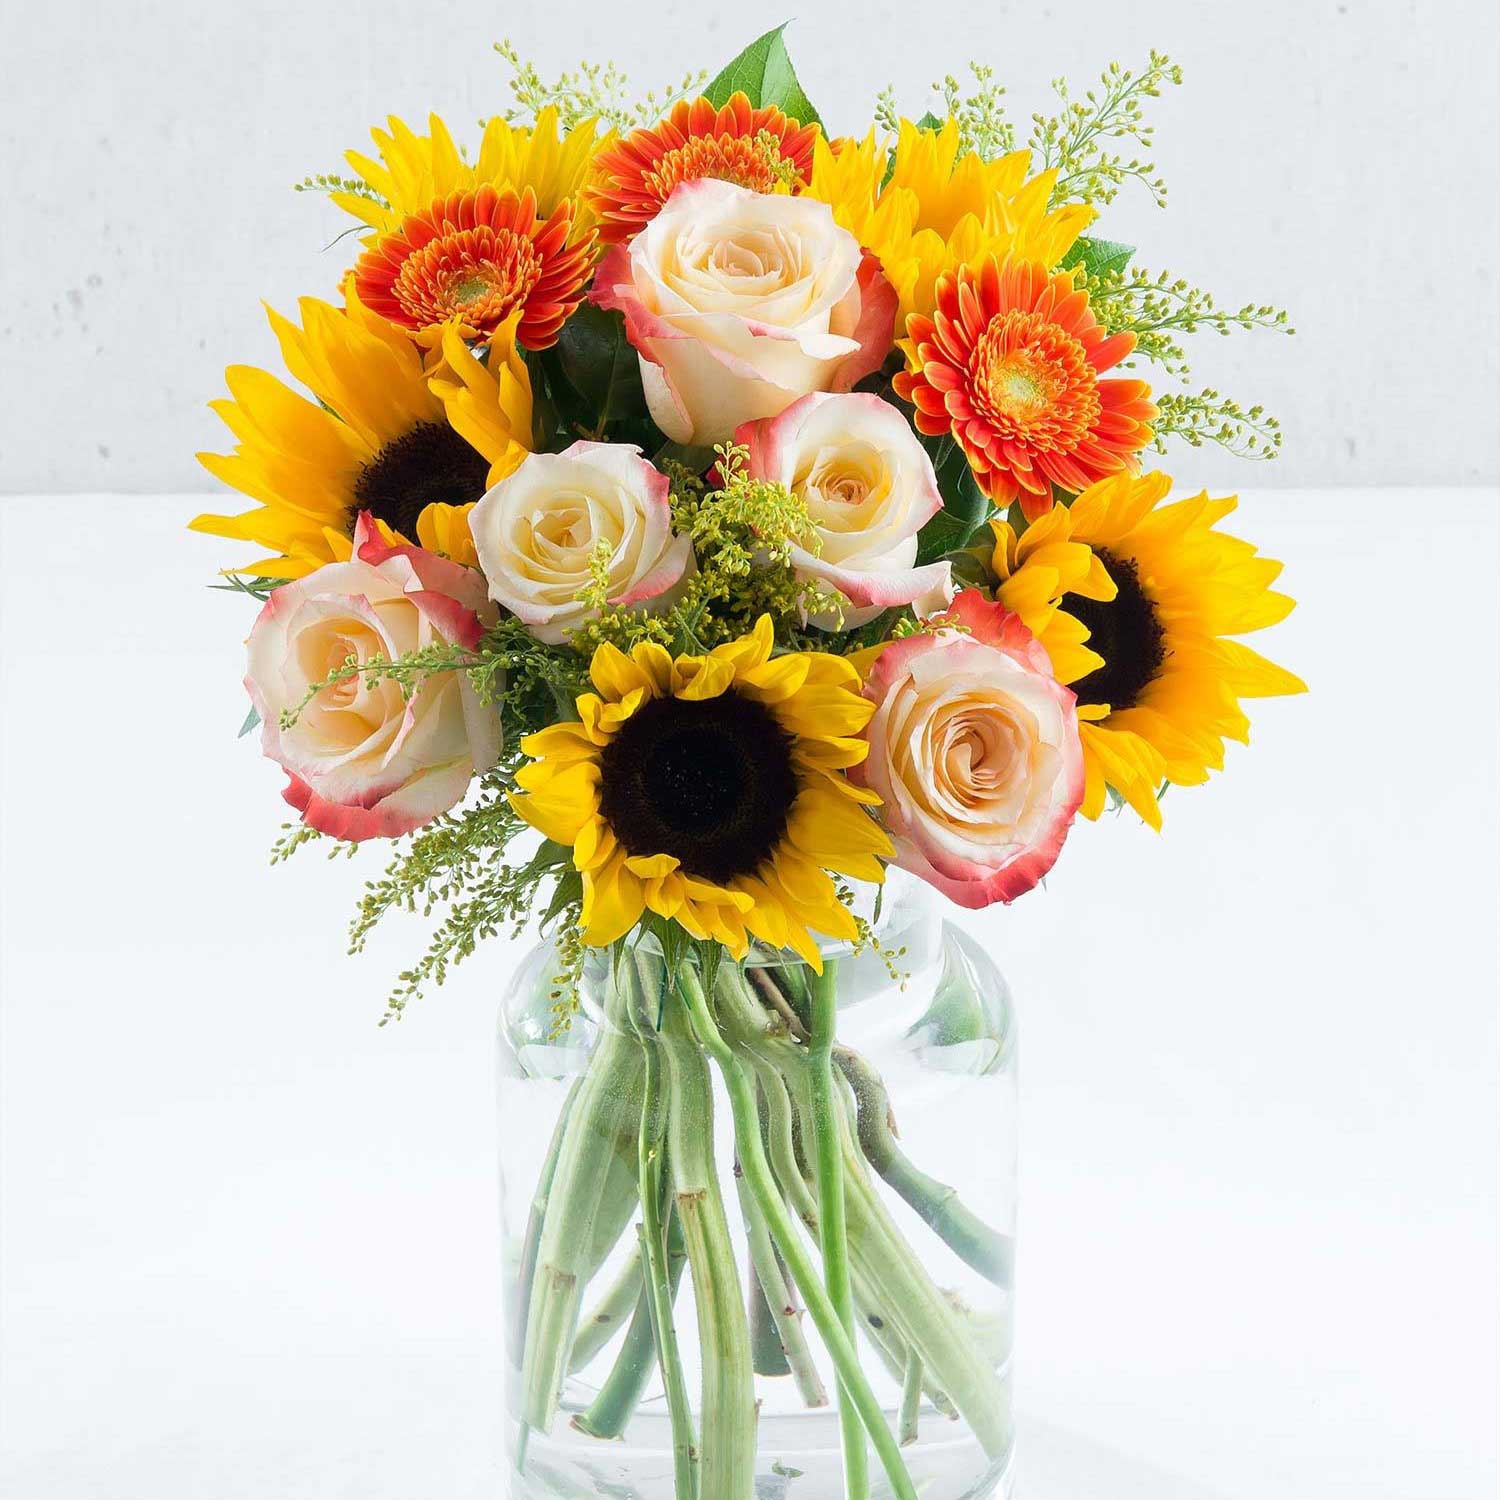 Send Dazzling Sunflower and Rose Hand-tied